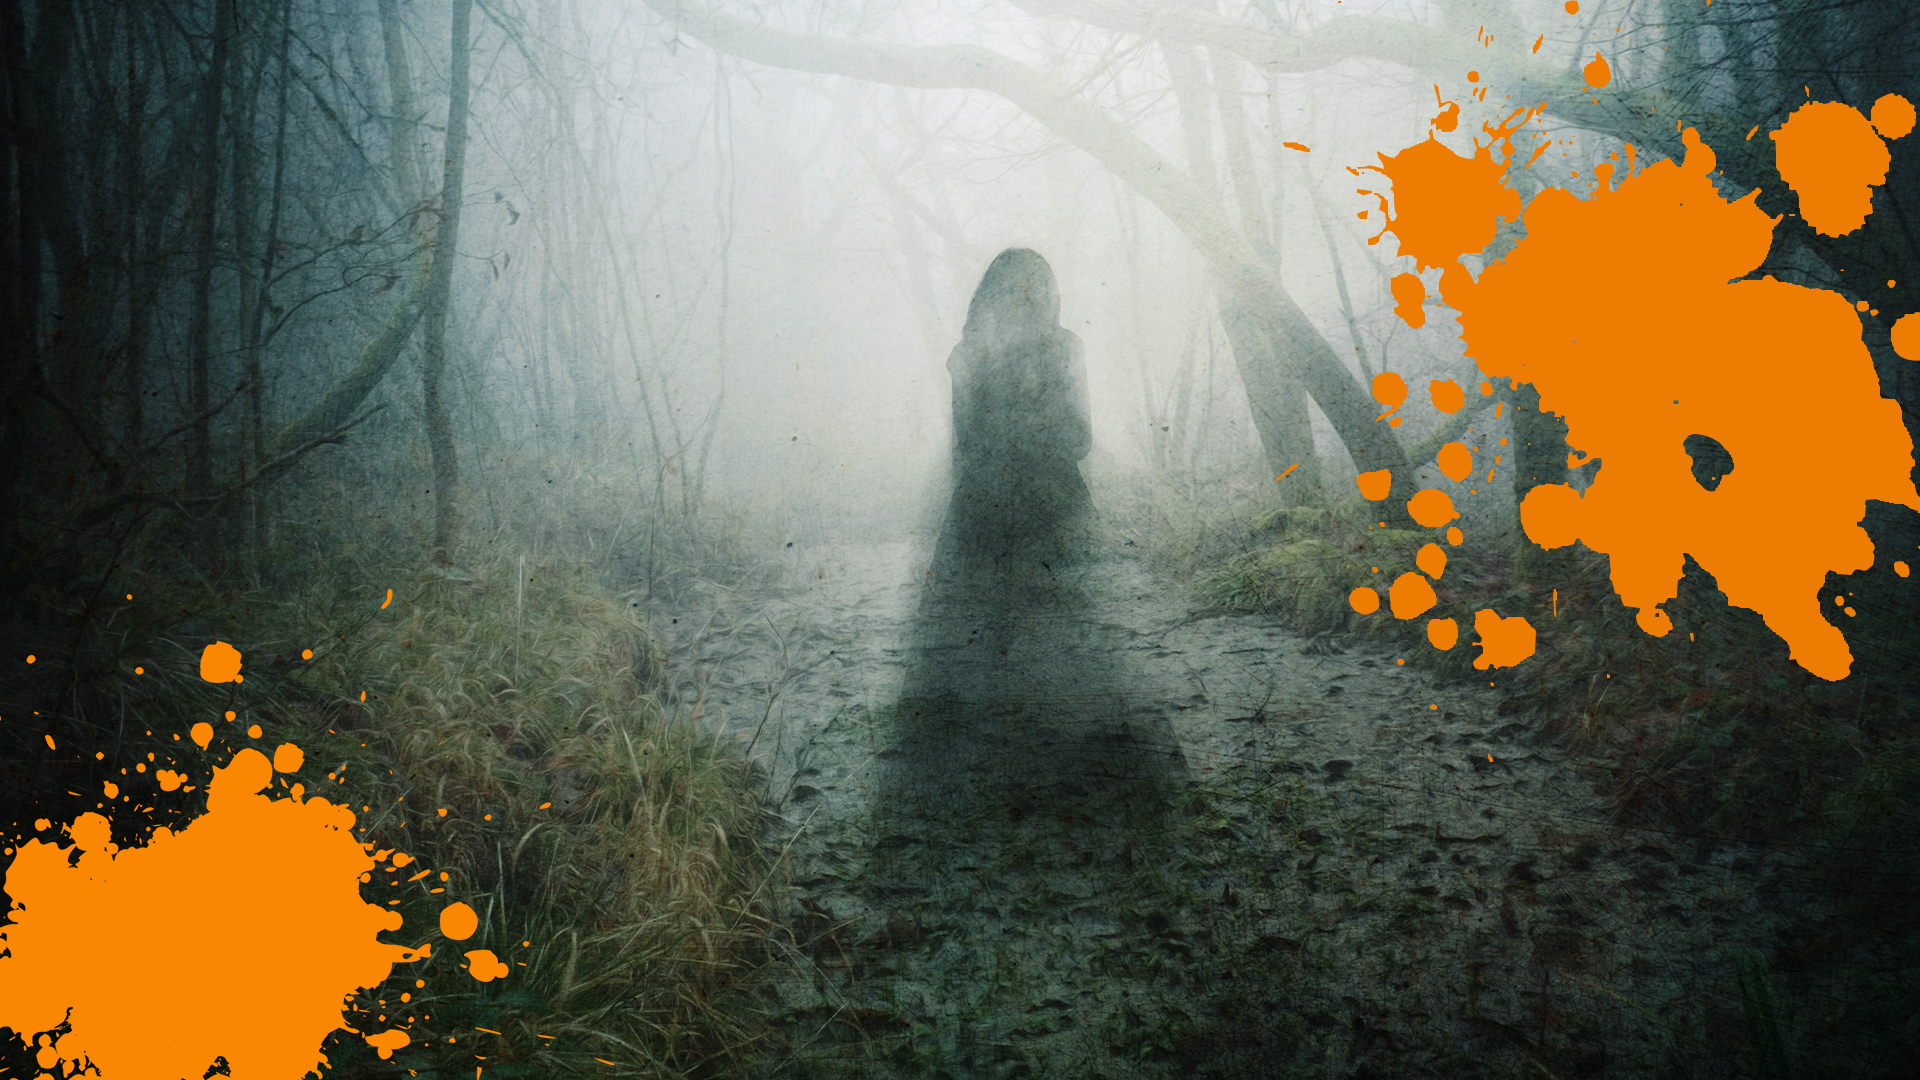 Creepy figure in forest with orange splats